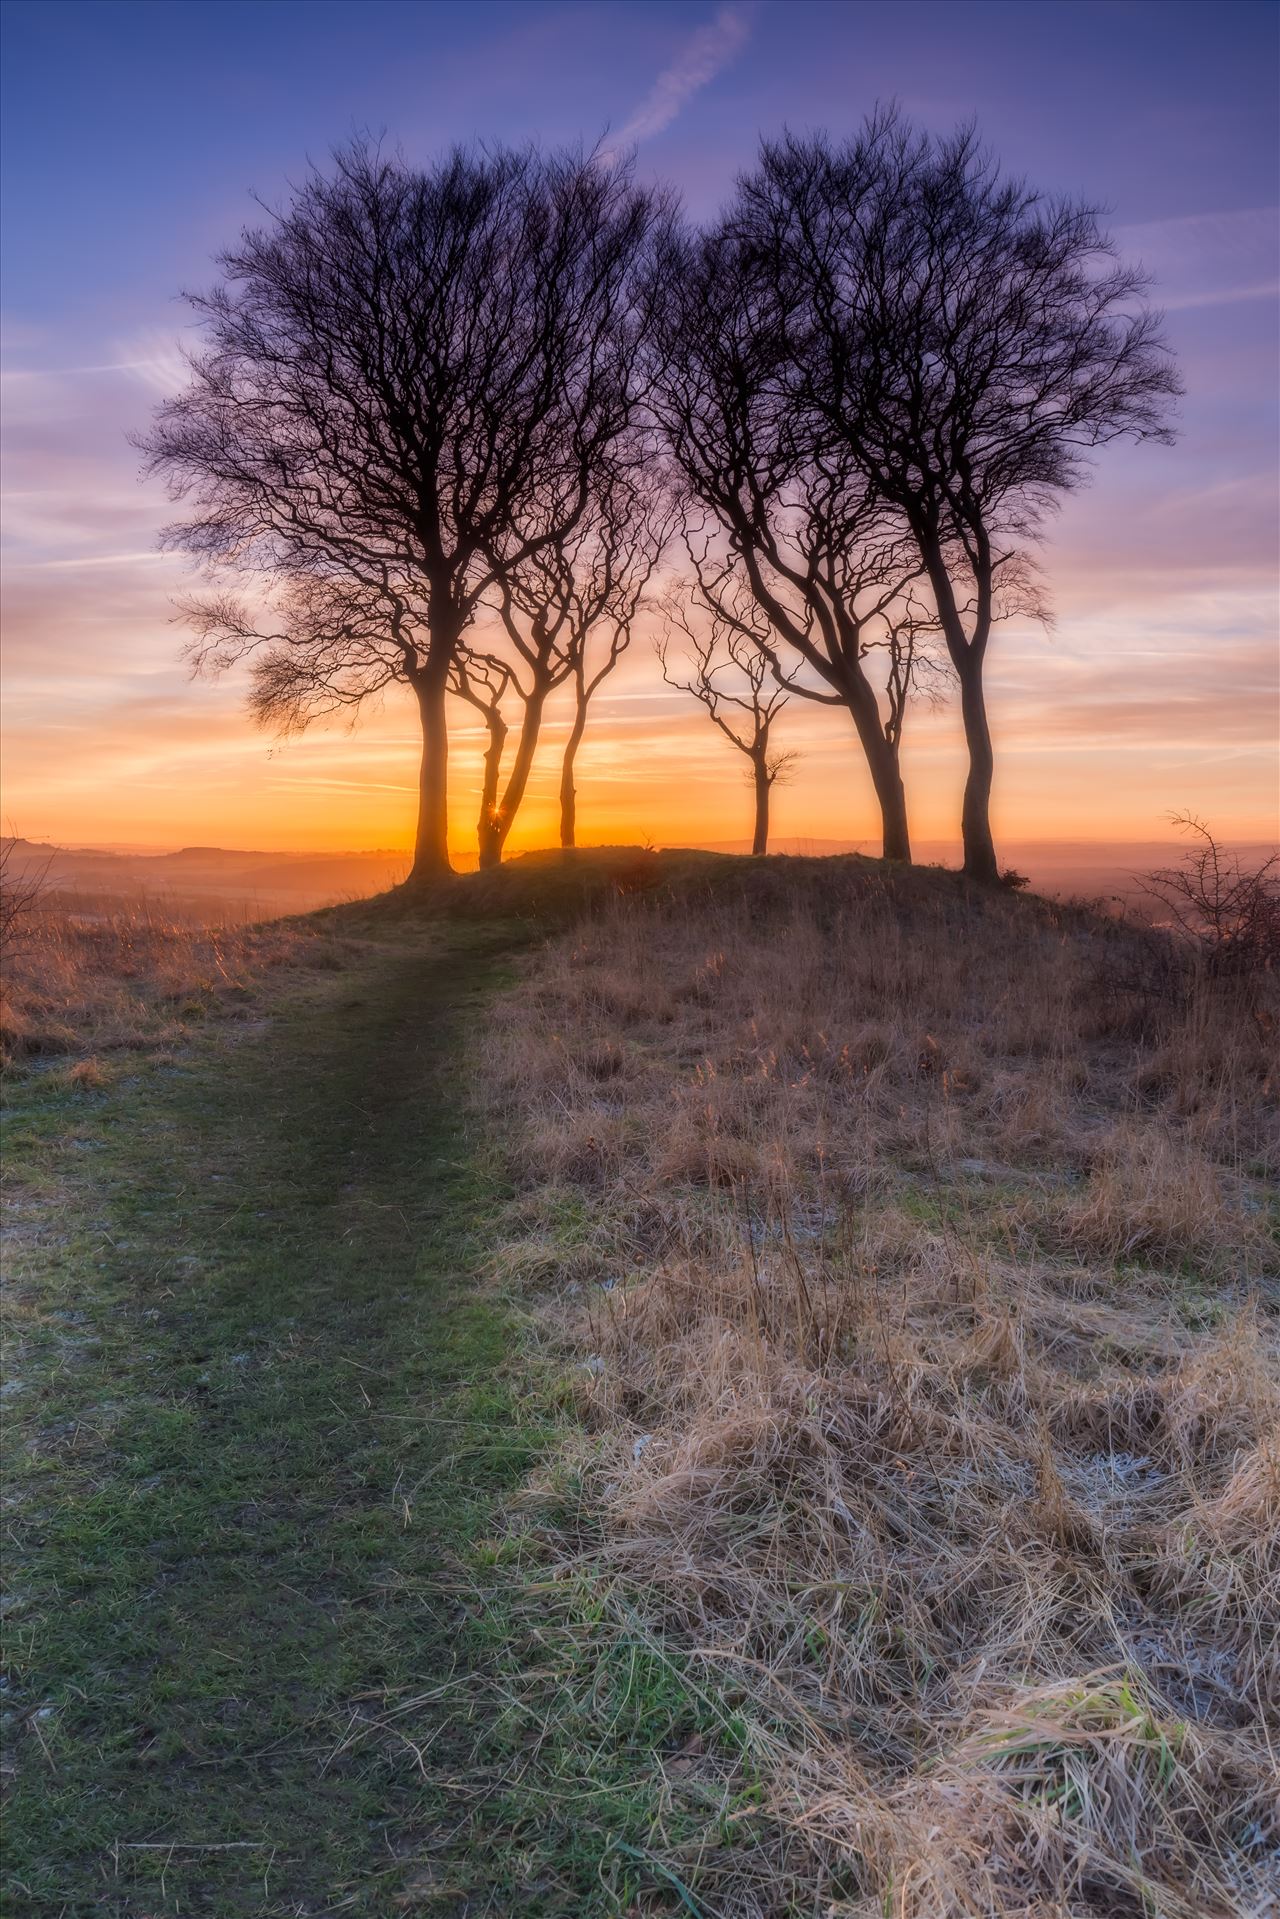 Sunset at Copt Hill - Orton edit Copt Hill is an ancient burial ground near Houghton-le-Spring. The site is marked by six trees. Presumably there used to be a seventh tree, as they are known as the Seven Sisters. by philreay